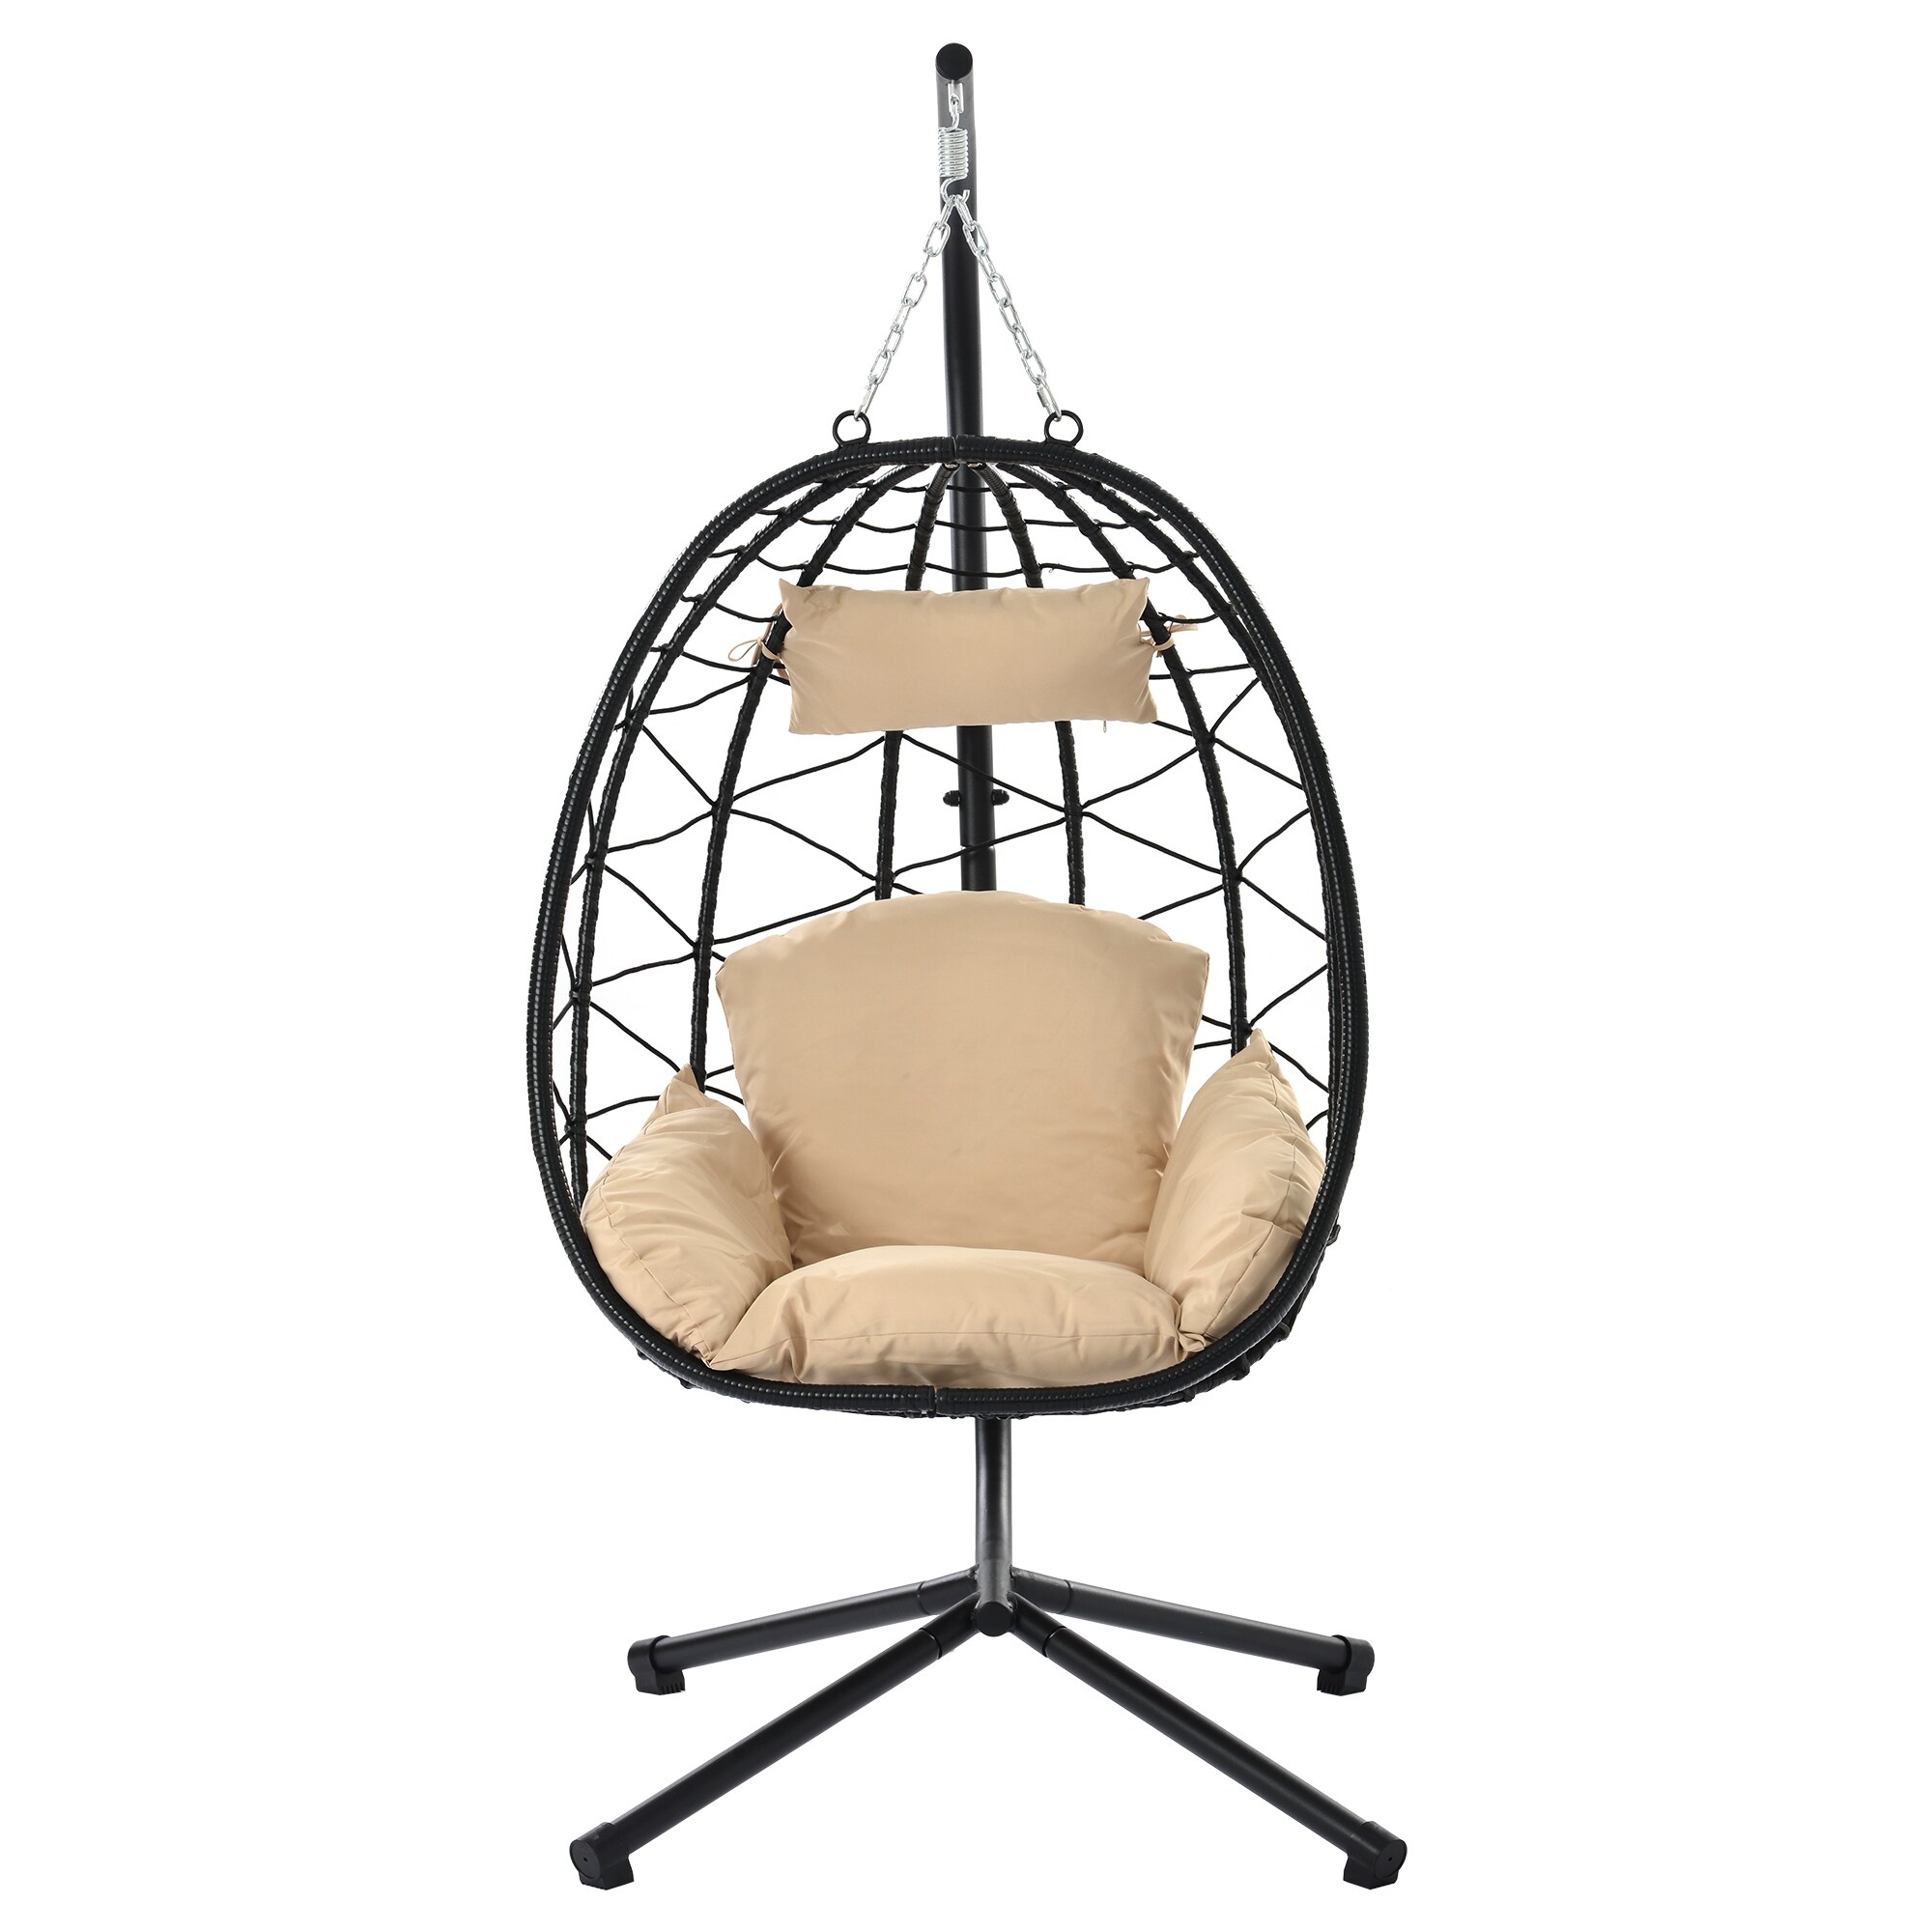 https://ak1.ostkcdn.com/images/products/is/images/direct/9be12b12d54340616e6cb4565e32a6be1af8b92c/Indoor-Outdoor-Egg-Chair-with-Stand-and-Waterproof-Cushion.jpg